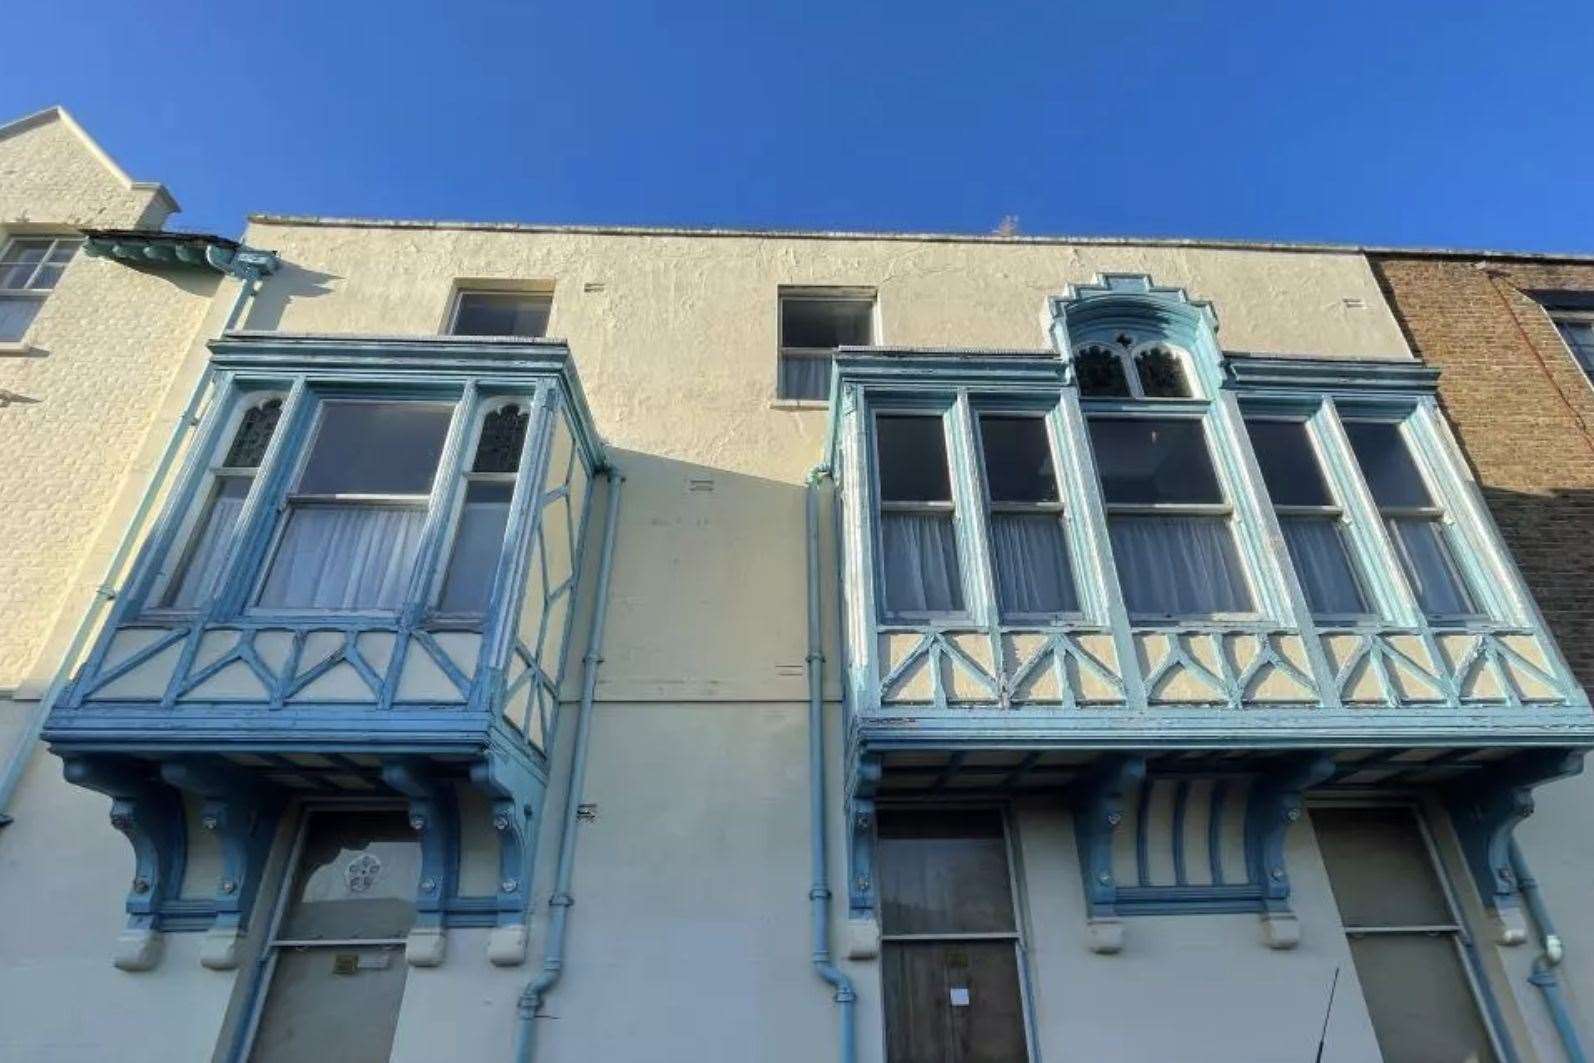 Developers will have to paint the windows of the Ramsgate property a muted blue rather than the bright colour they wanted. Picture: Clive Emson Auctioneers